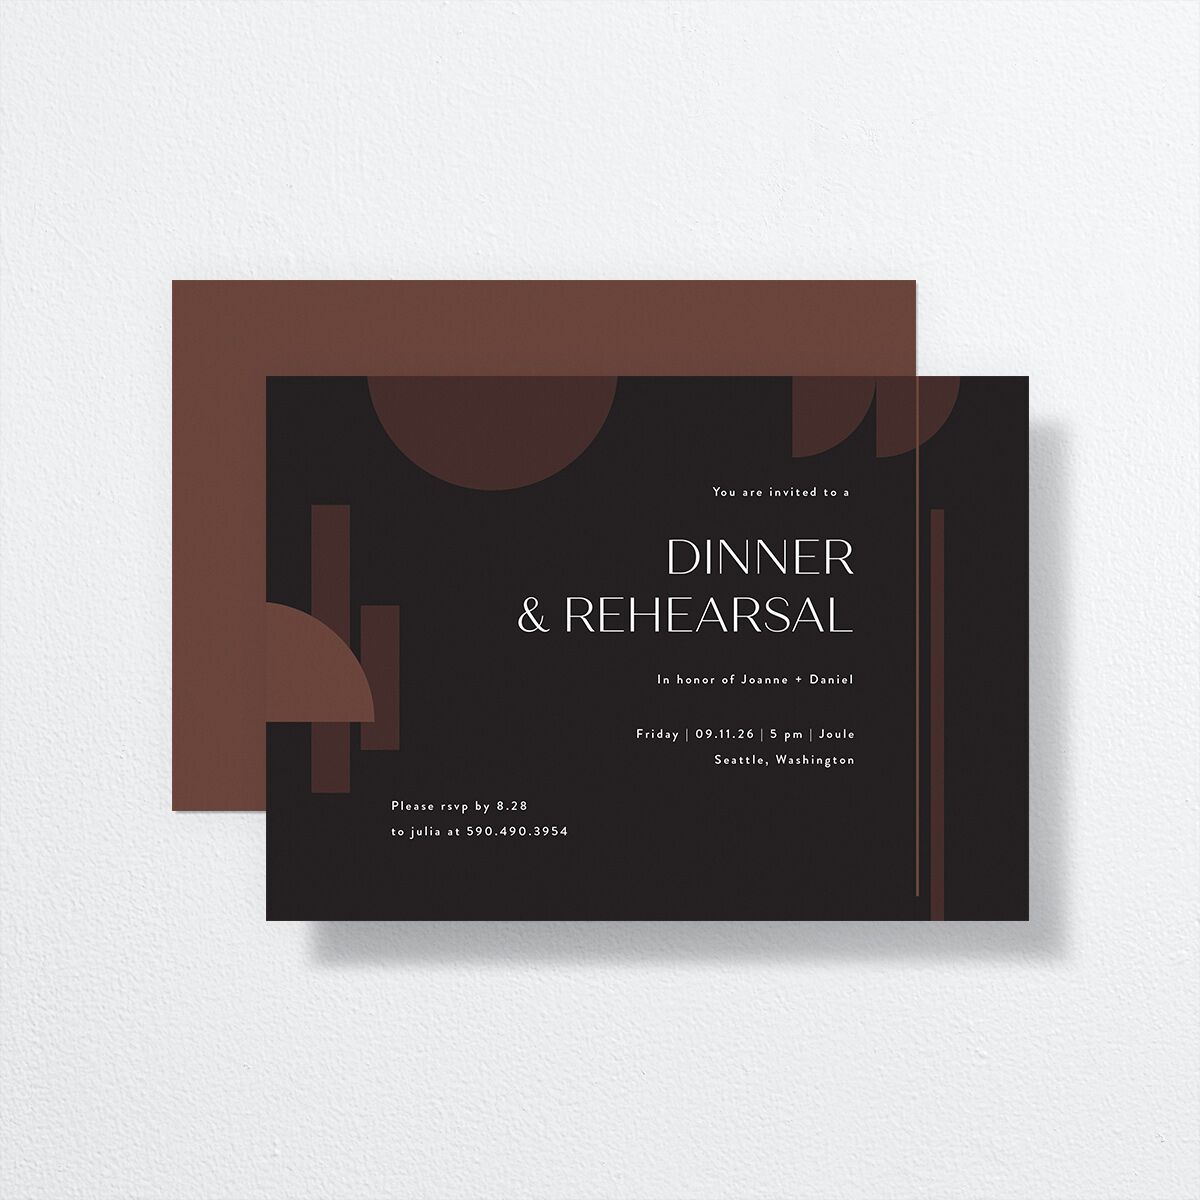 Neo Accent Rehearsal Dinner Invitations front-and-back in brown